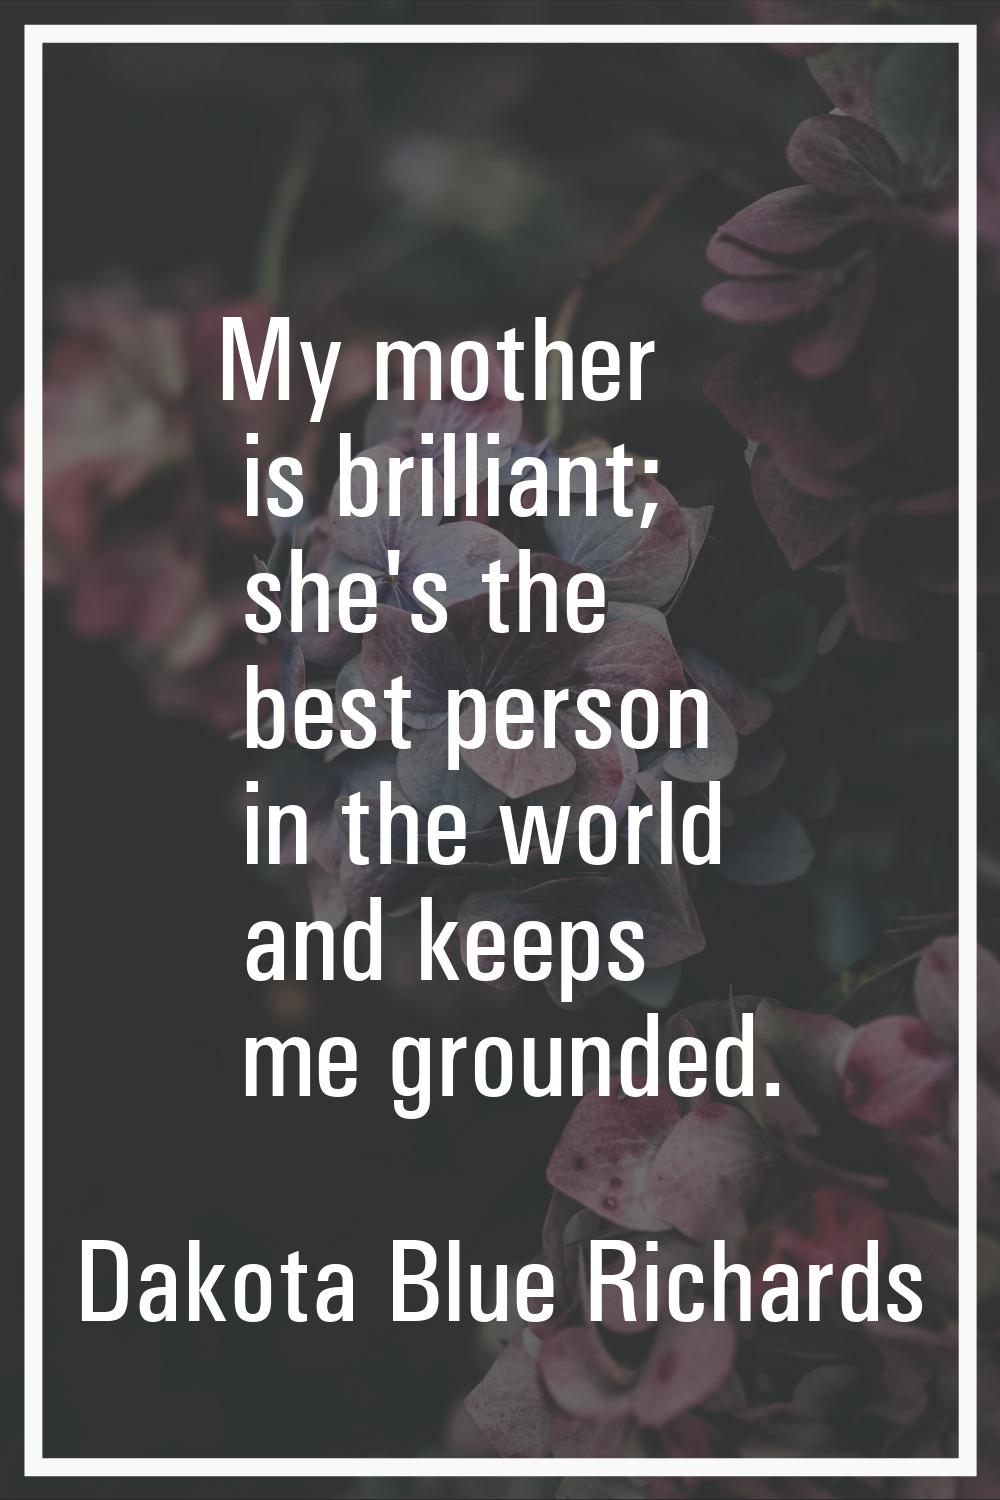 My mother is brilliant; she's the best person in the world and keeps me grounded.